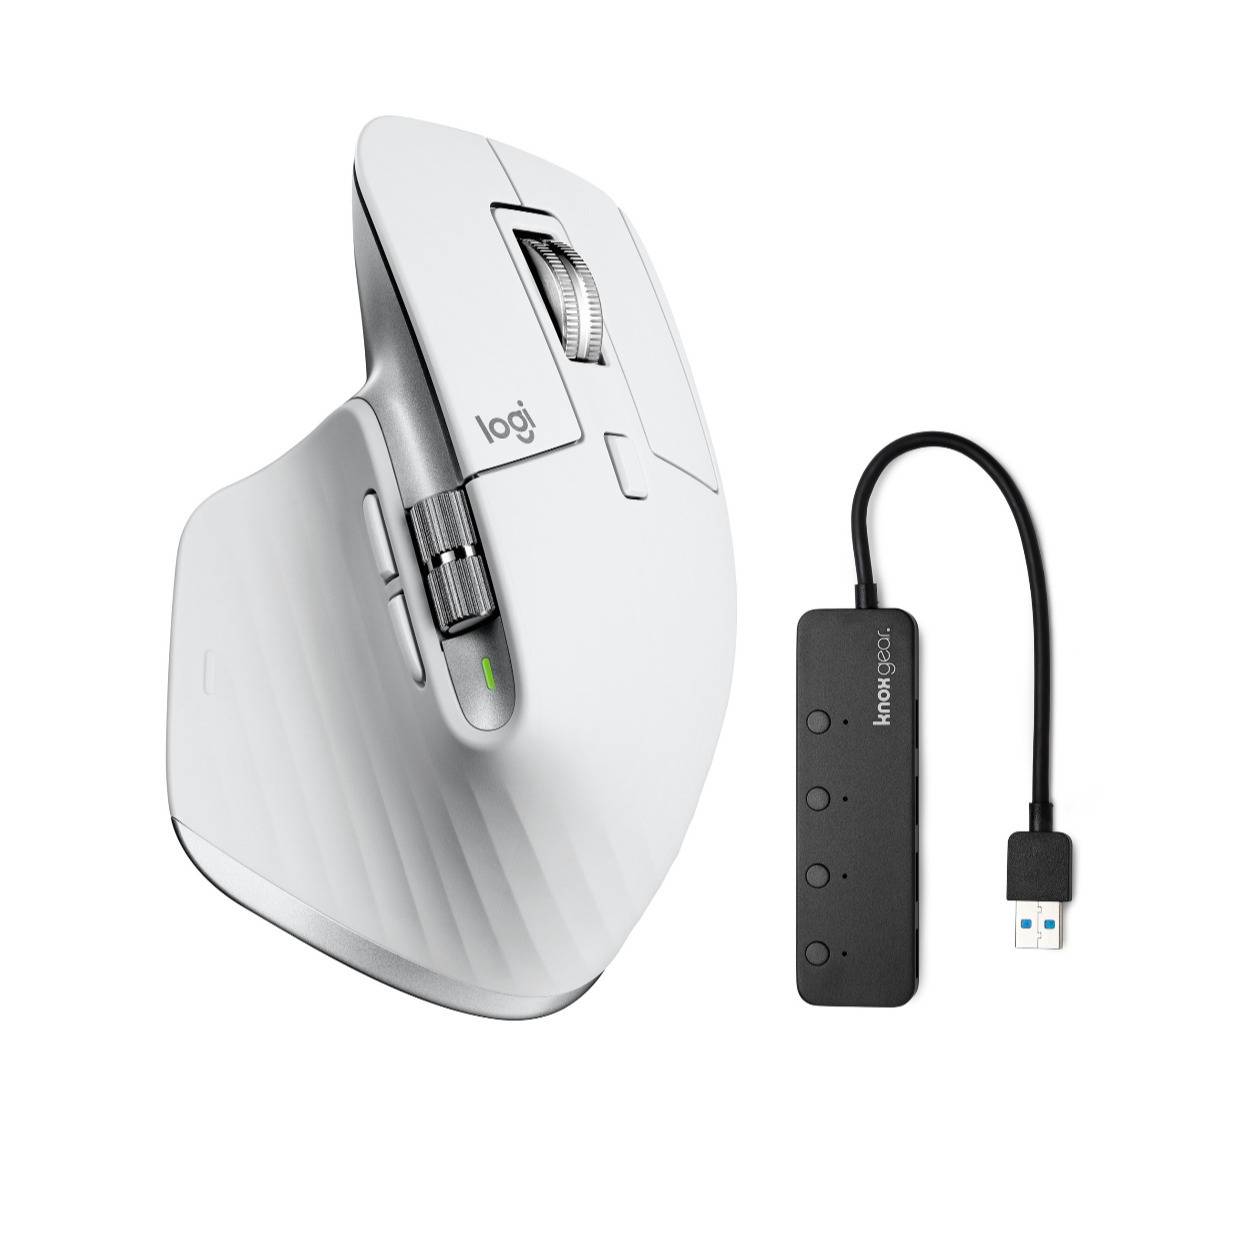 Logitech MX Master 3S Mouse (Pale Grey) and Knox Gear 4-Port USB 3.0 Hub